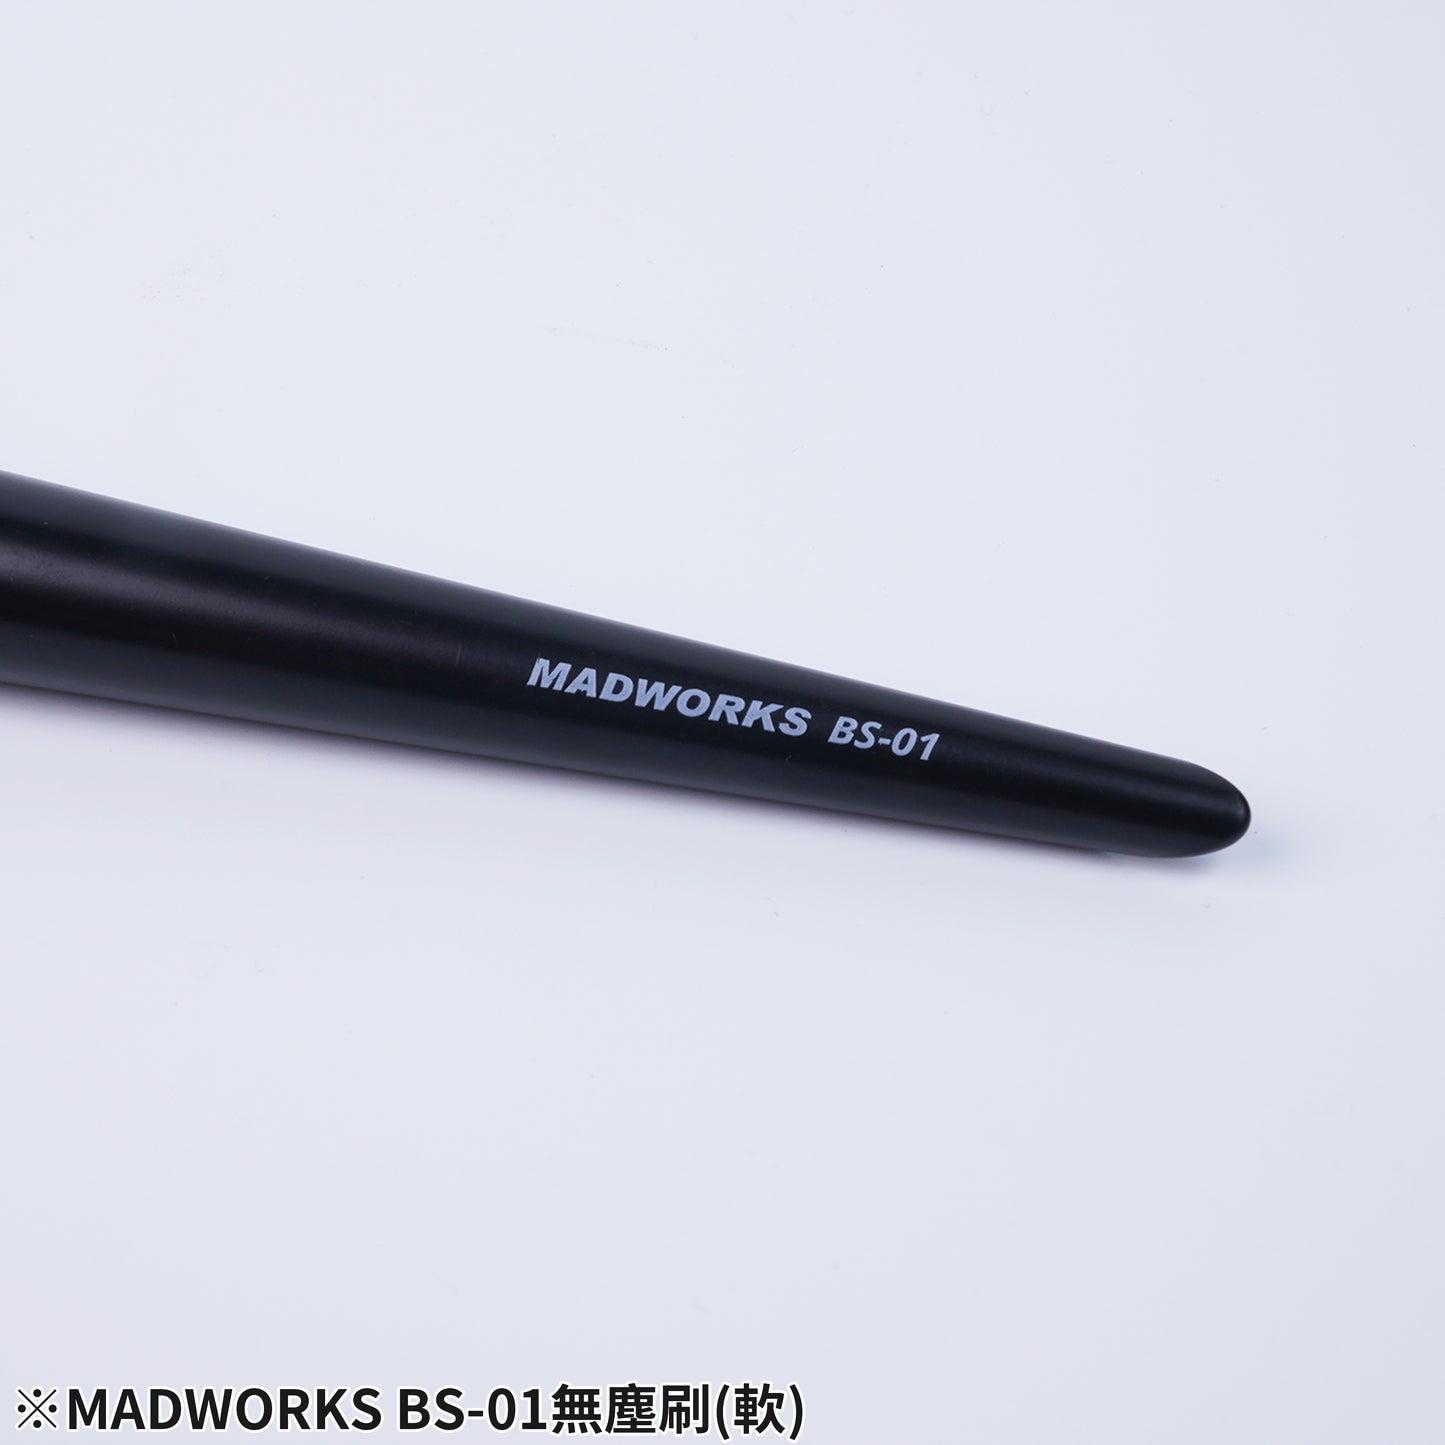 Madworks BS-01 MODEL CLEANING BRUSH (SOFT)